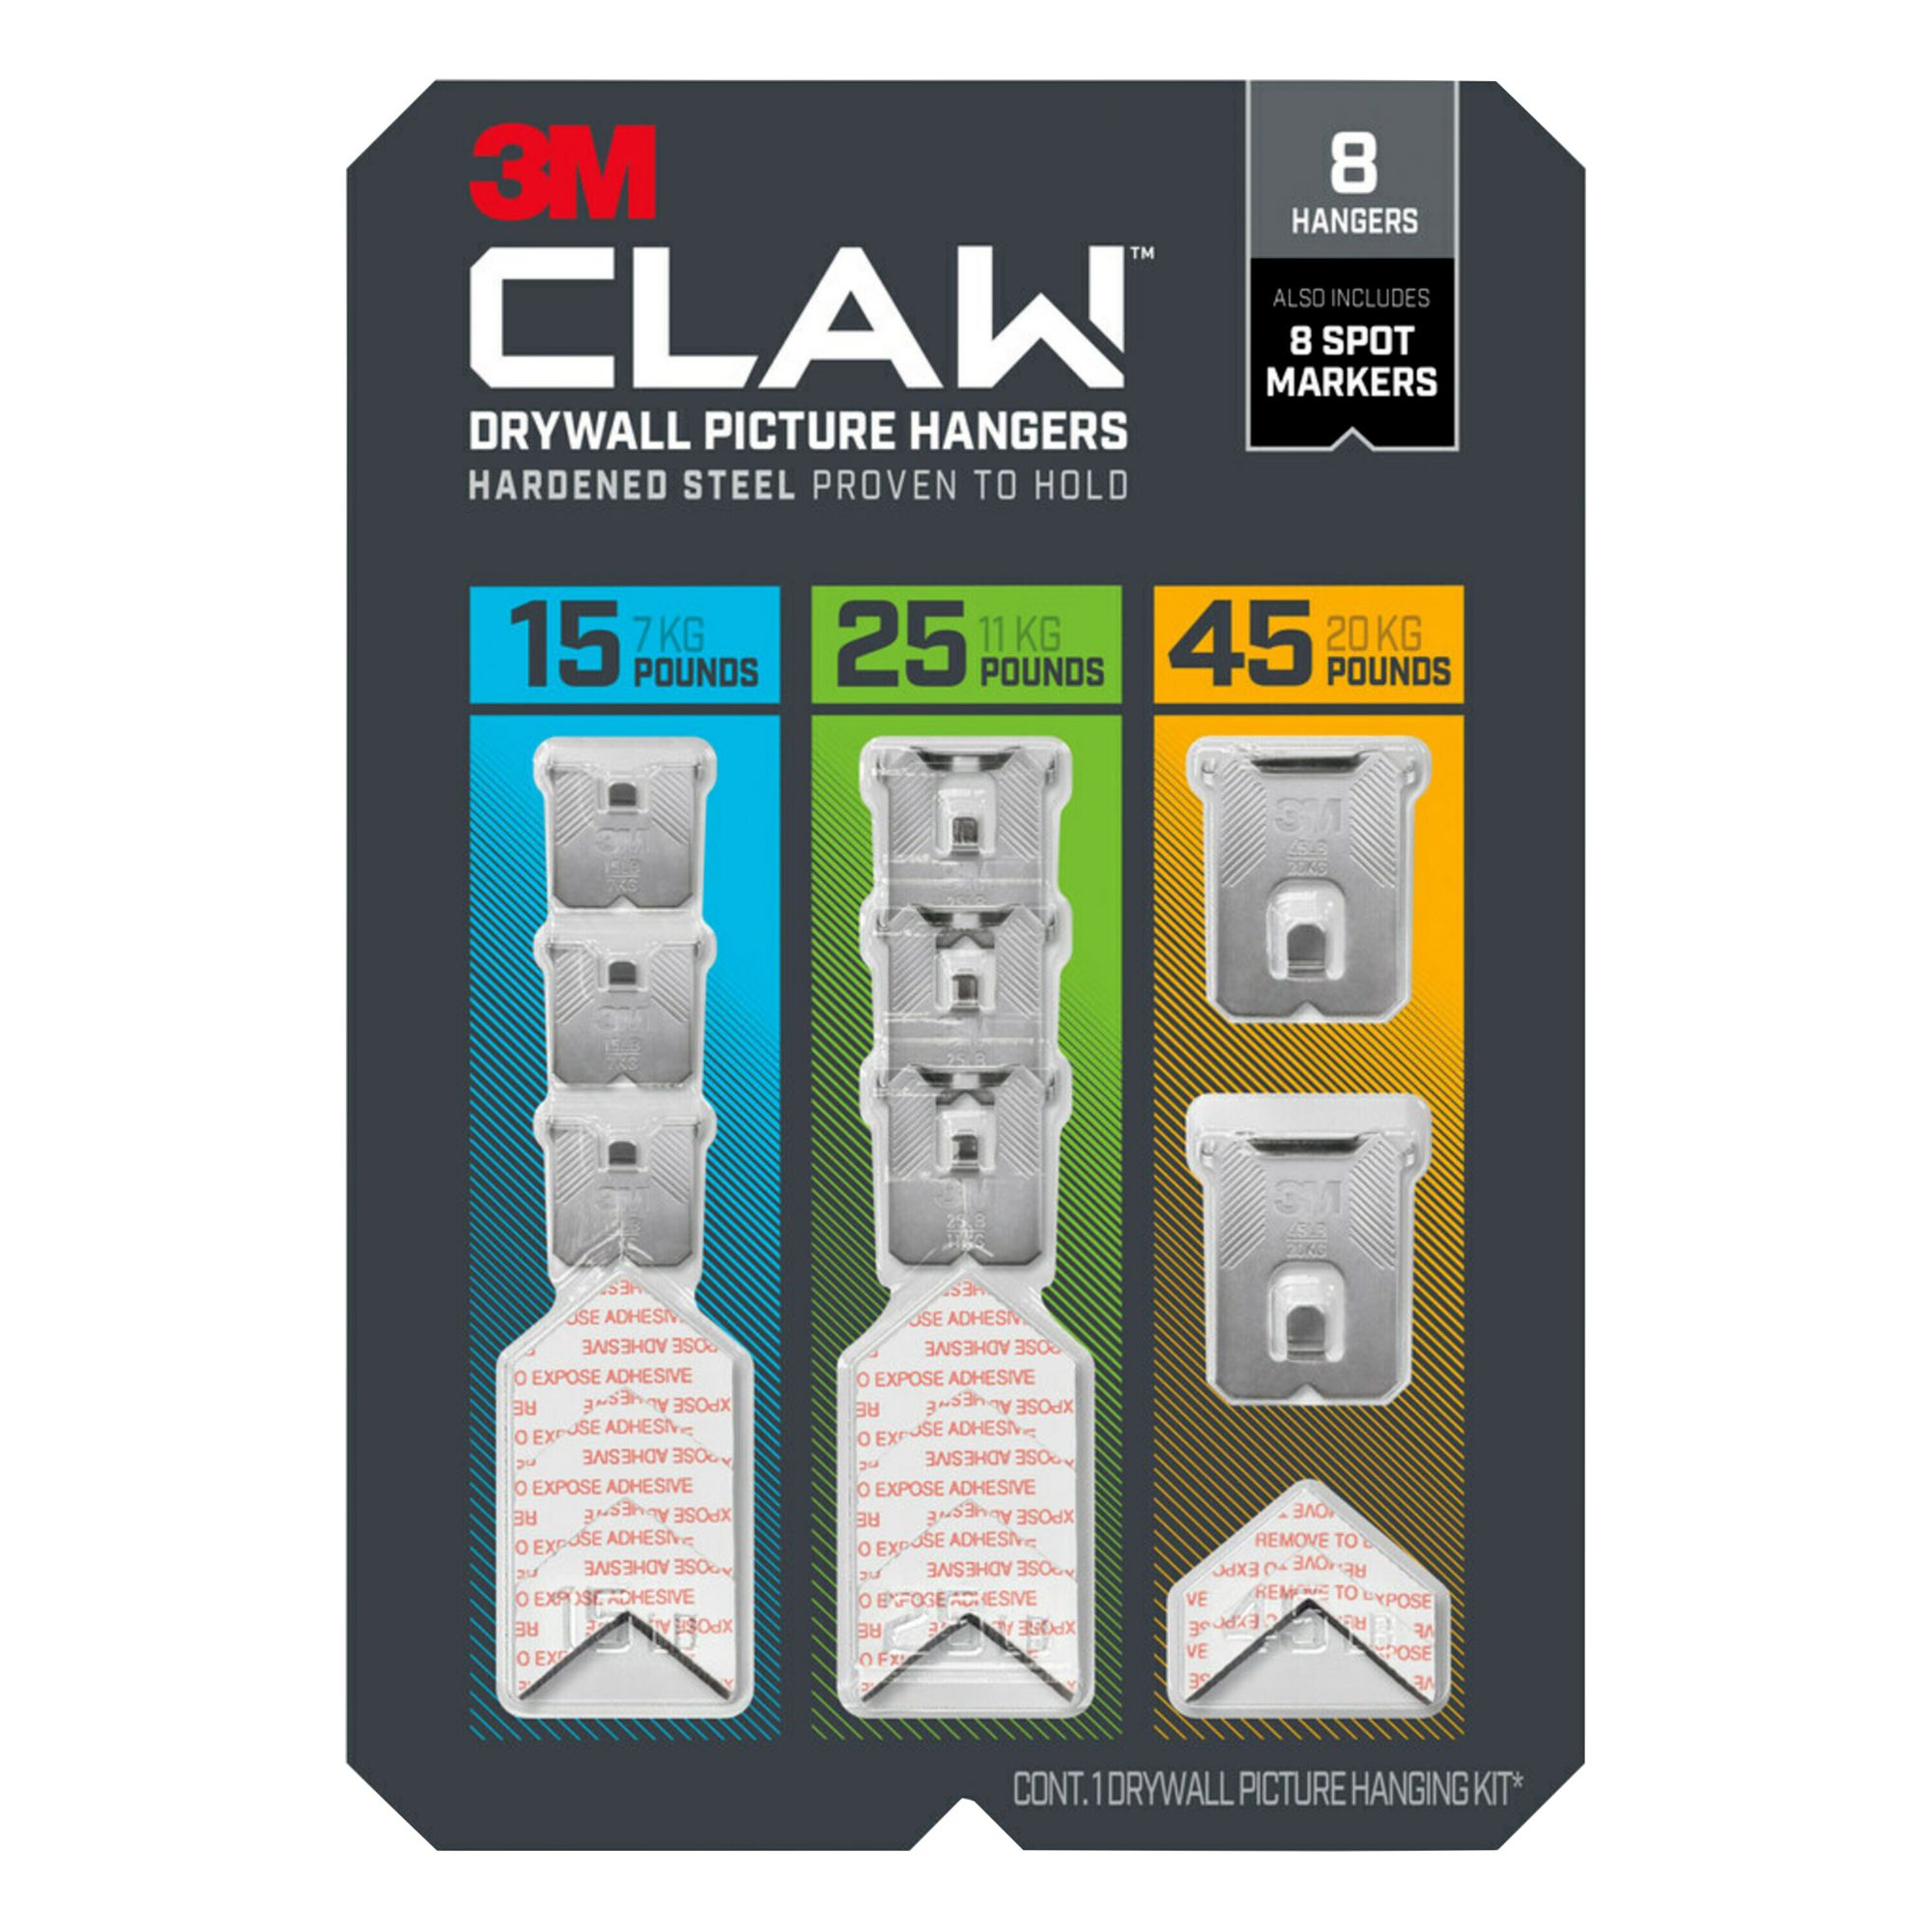 3M Claw Drywall Picture Hanger Set with Temporary Spot Markers